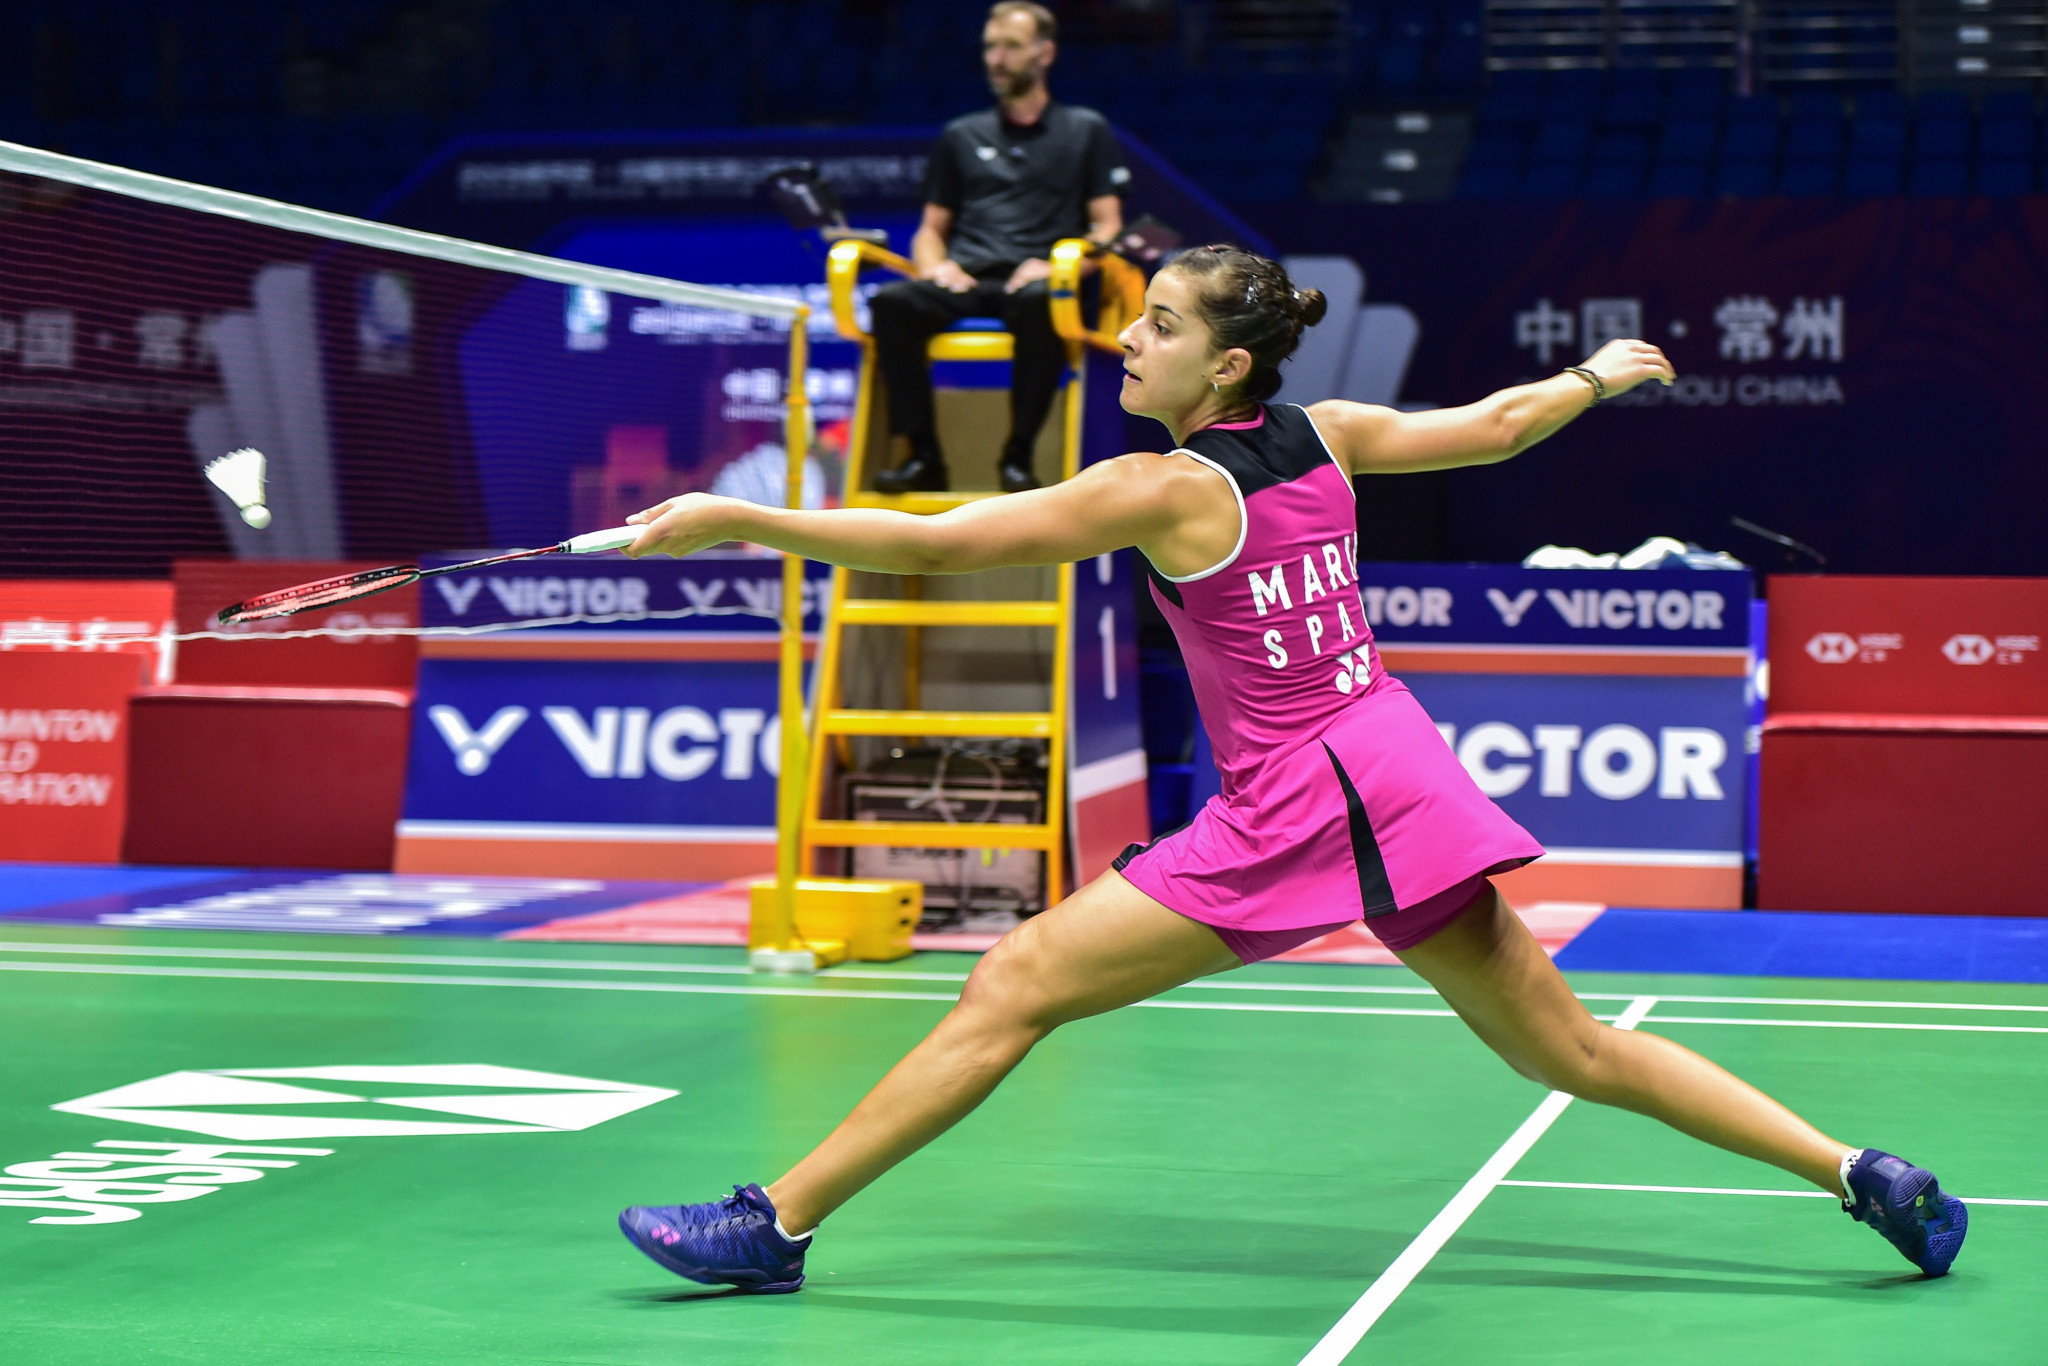 Olympic champion Marín through to semi-finals at BWF China Open